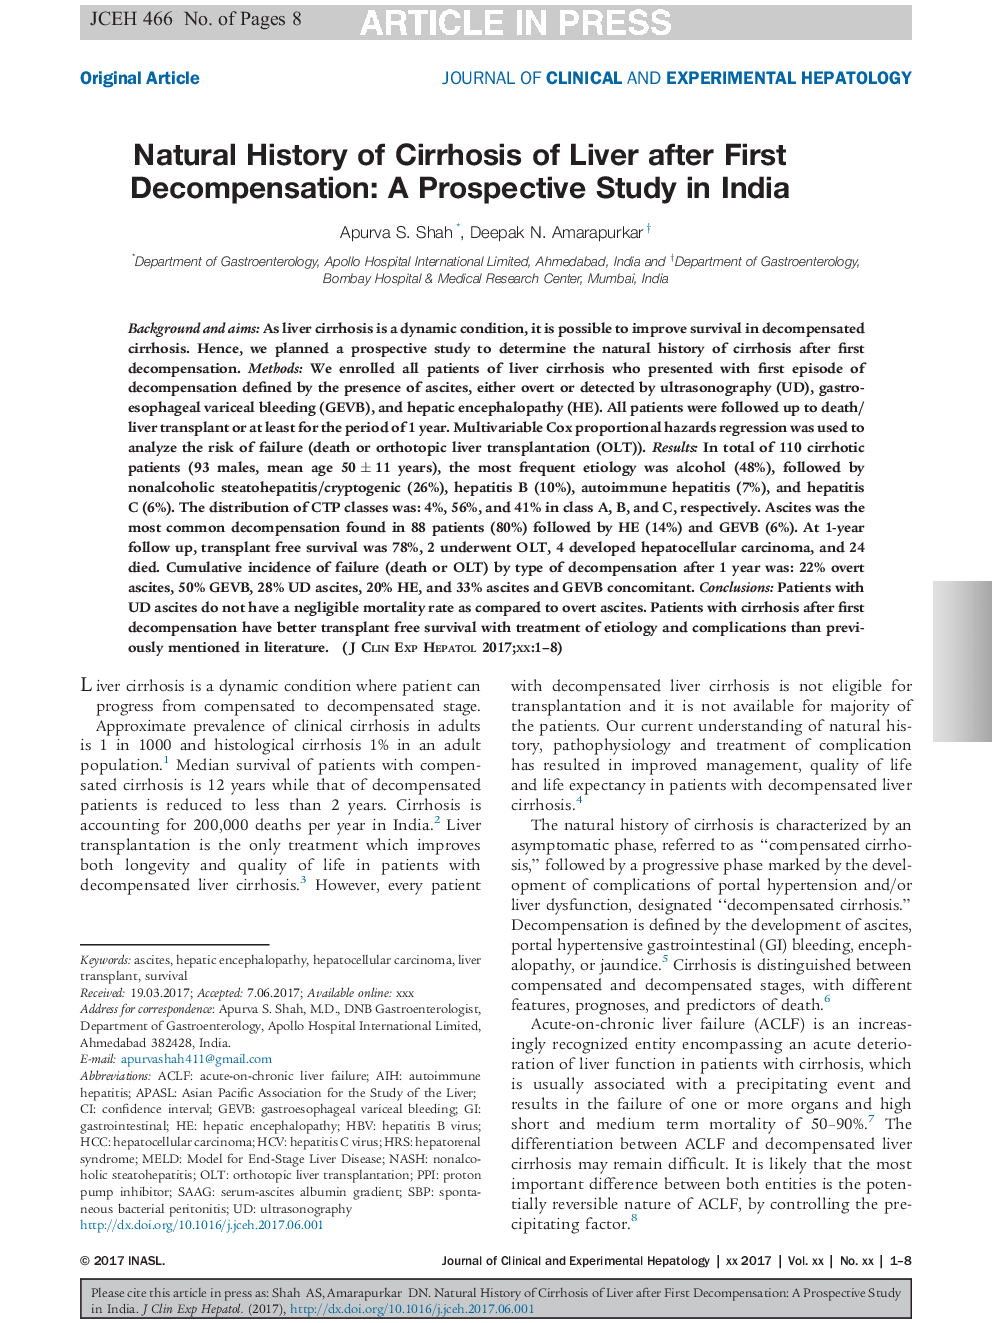 Natural History of Cirrhosis of Liver after First Decompensation: A Prospective Study in India